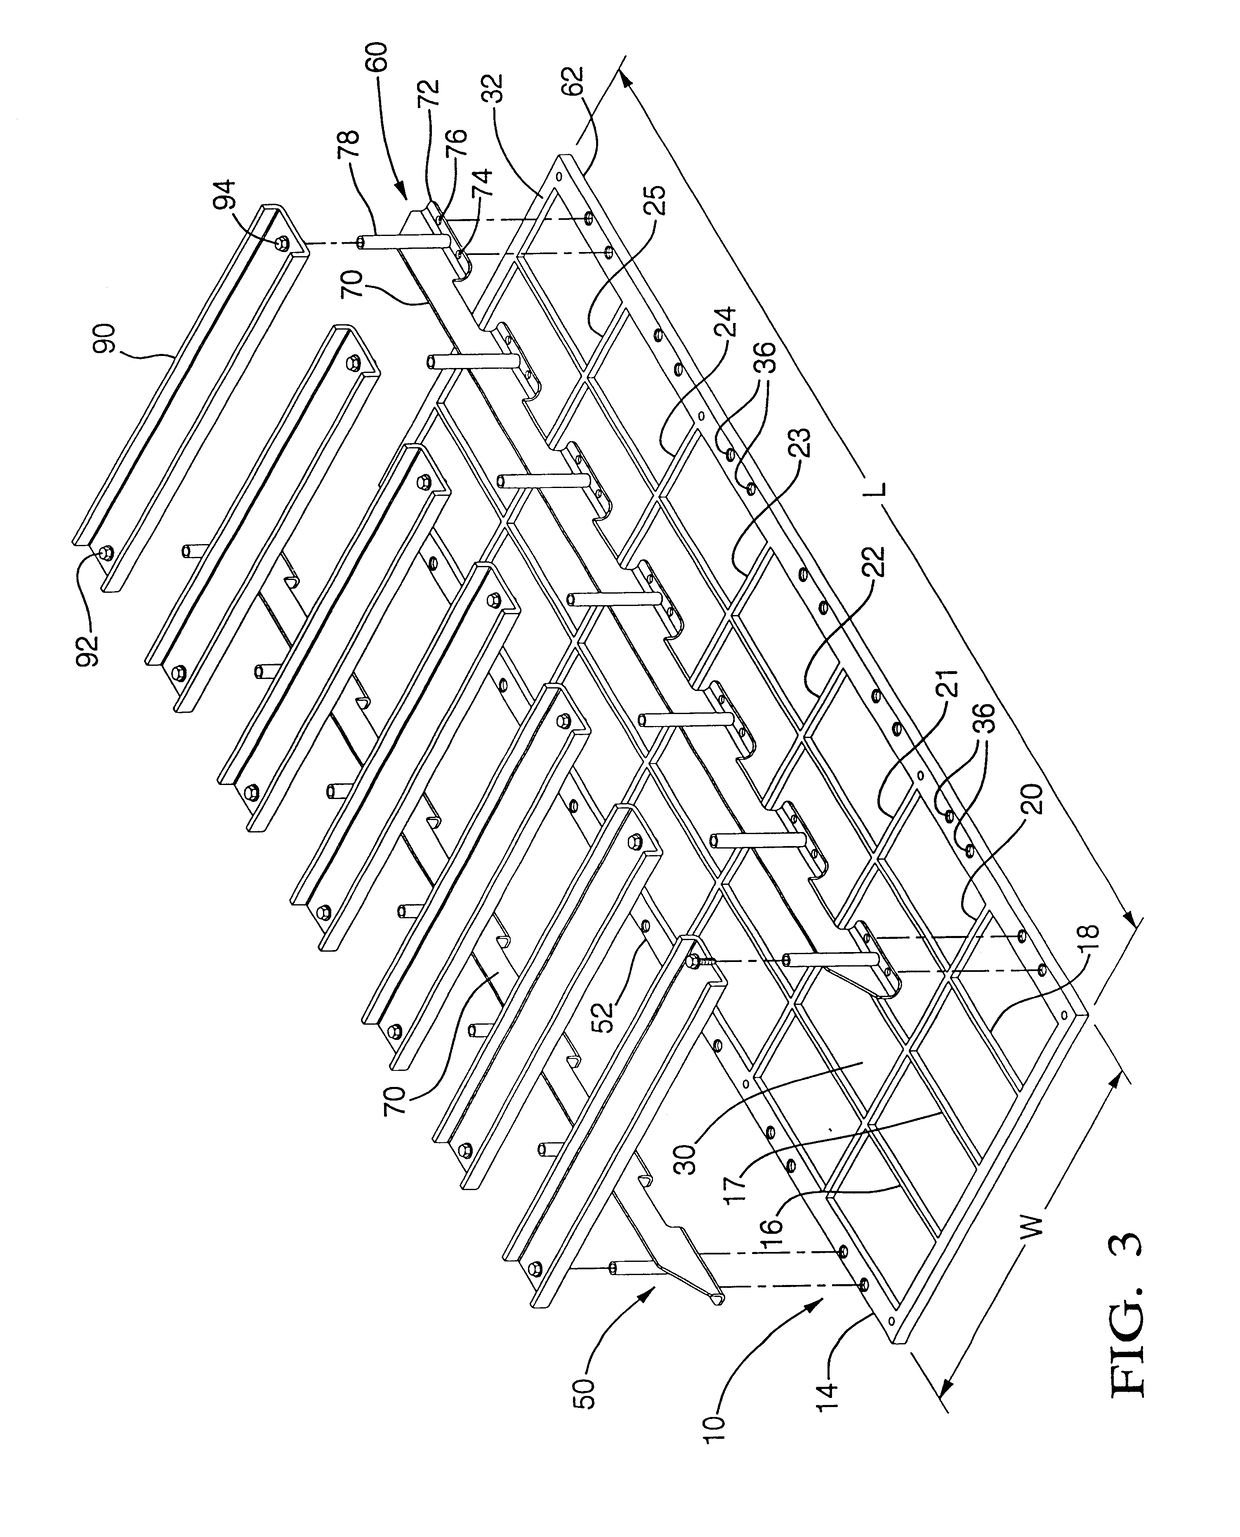 System of retaining a plurality of batteries for an electric/hybrid vehicle